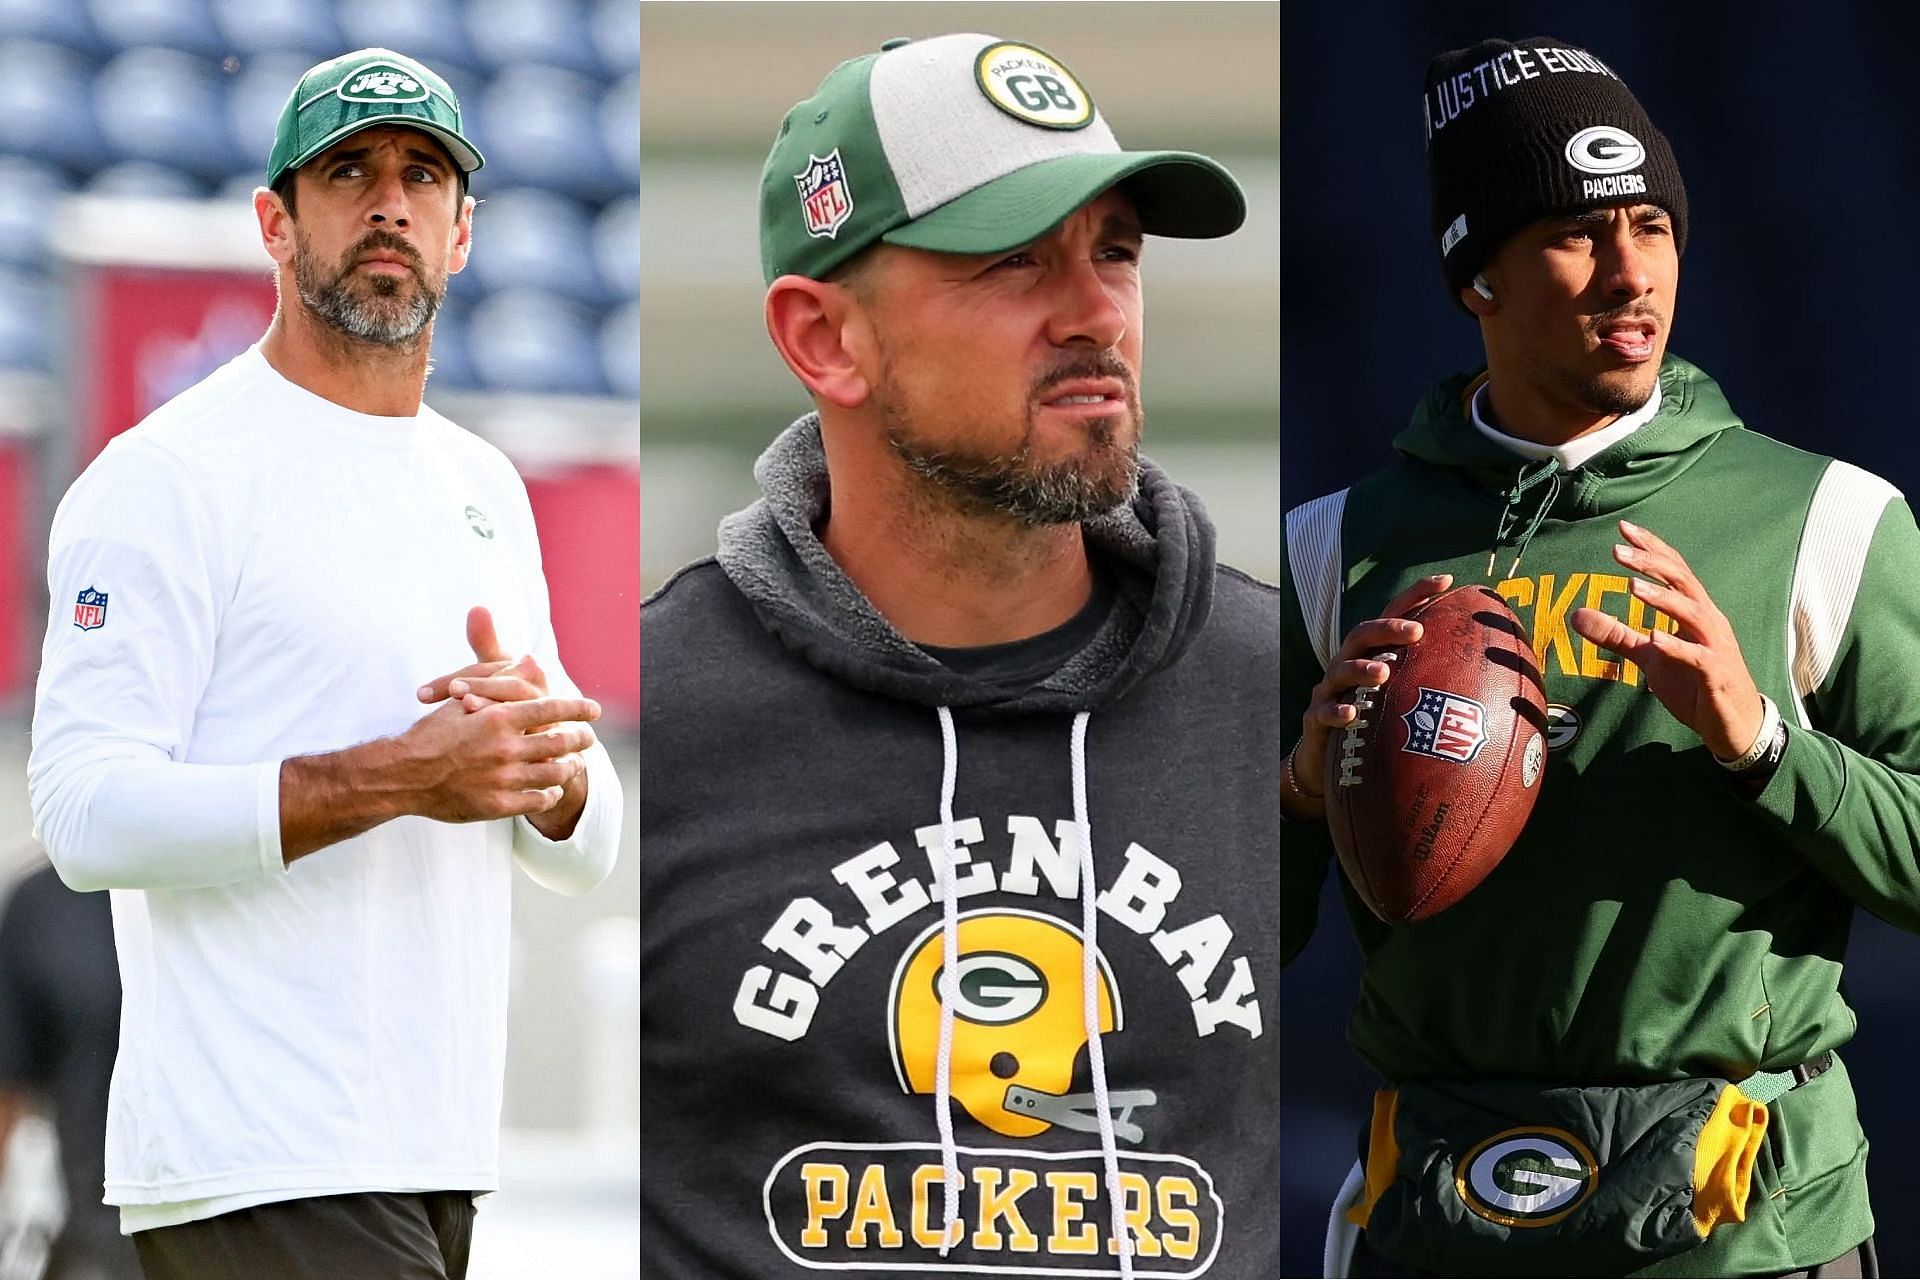 Matt LaFleur gets candid on Jordan Love leading the Packers after Aaron Rodgers exit